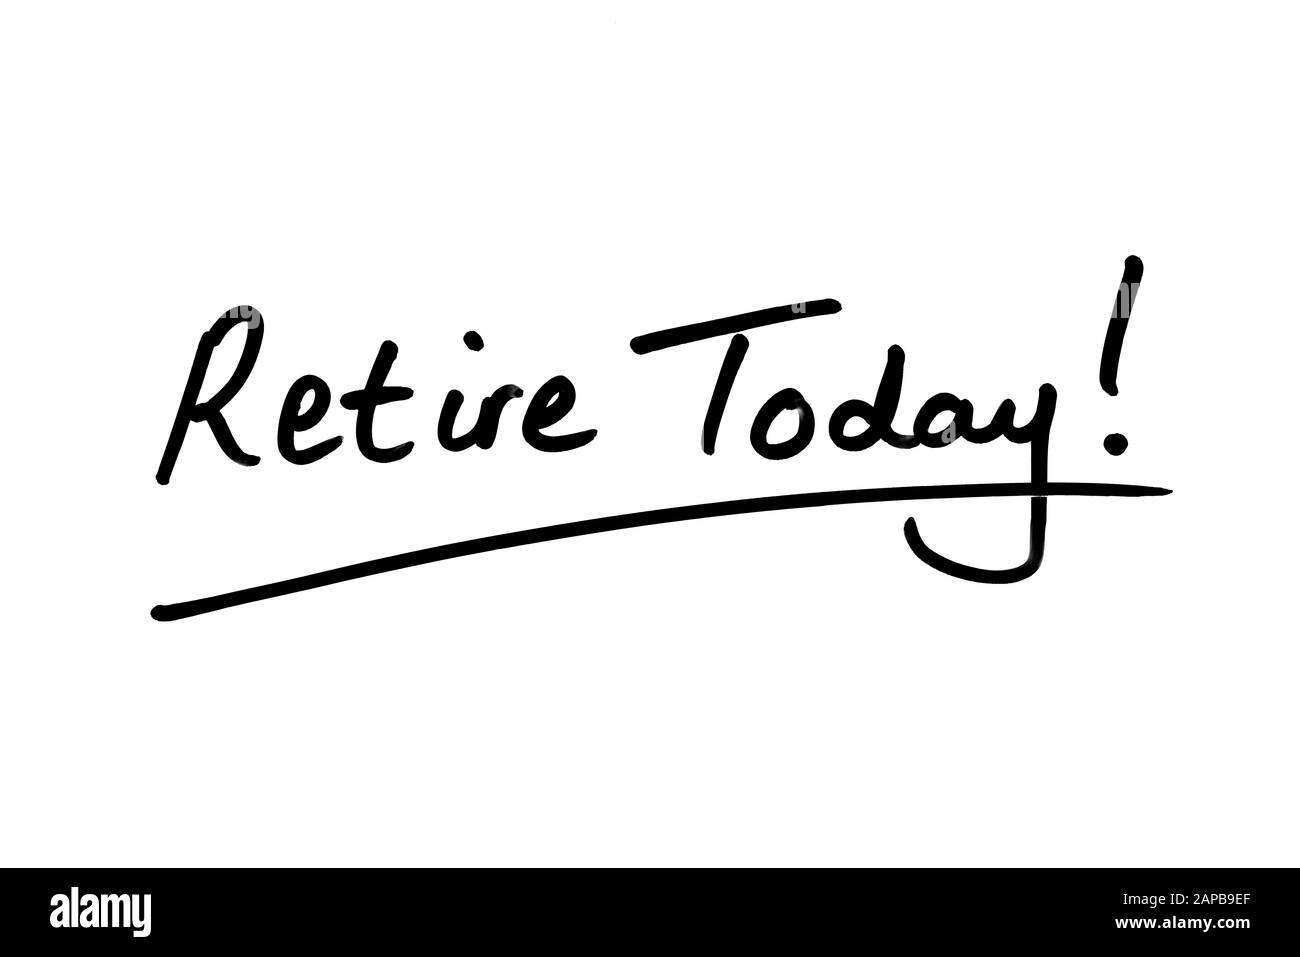 Retire Today! handwritten on a white background. Stock Photo